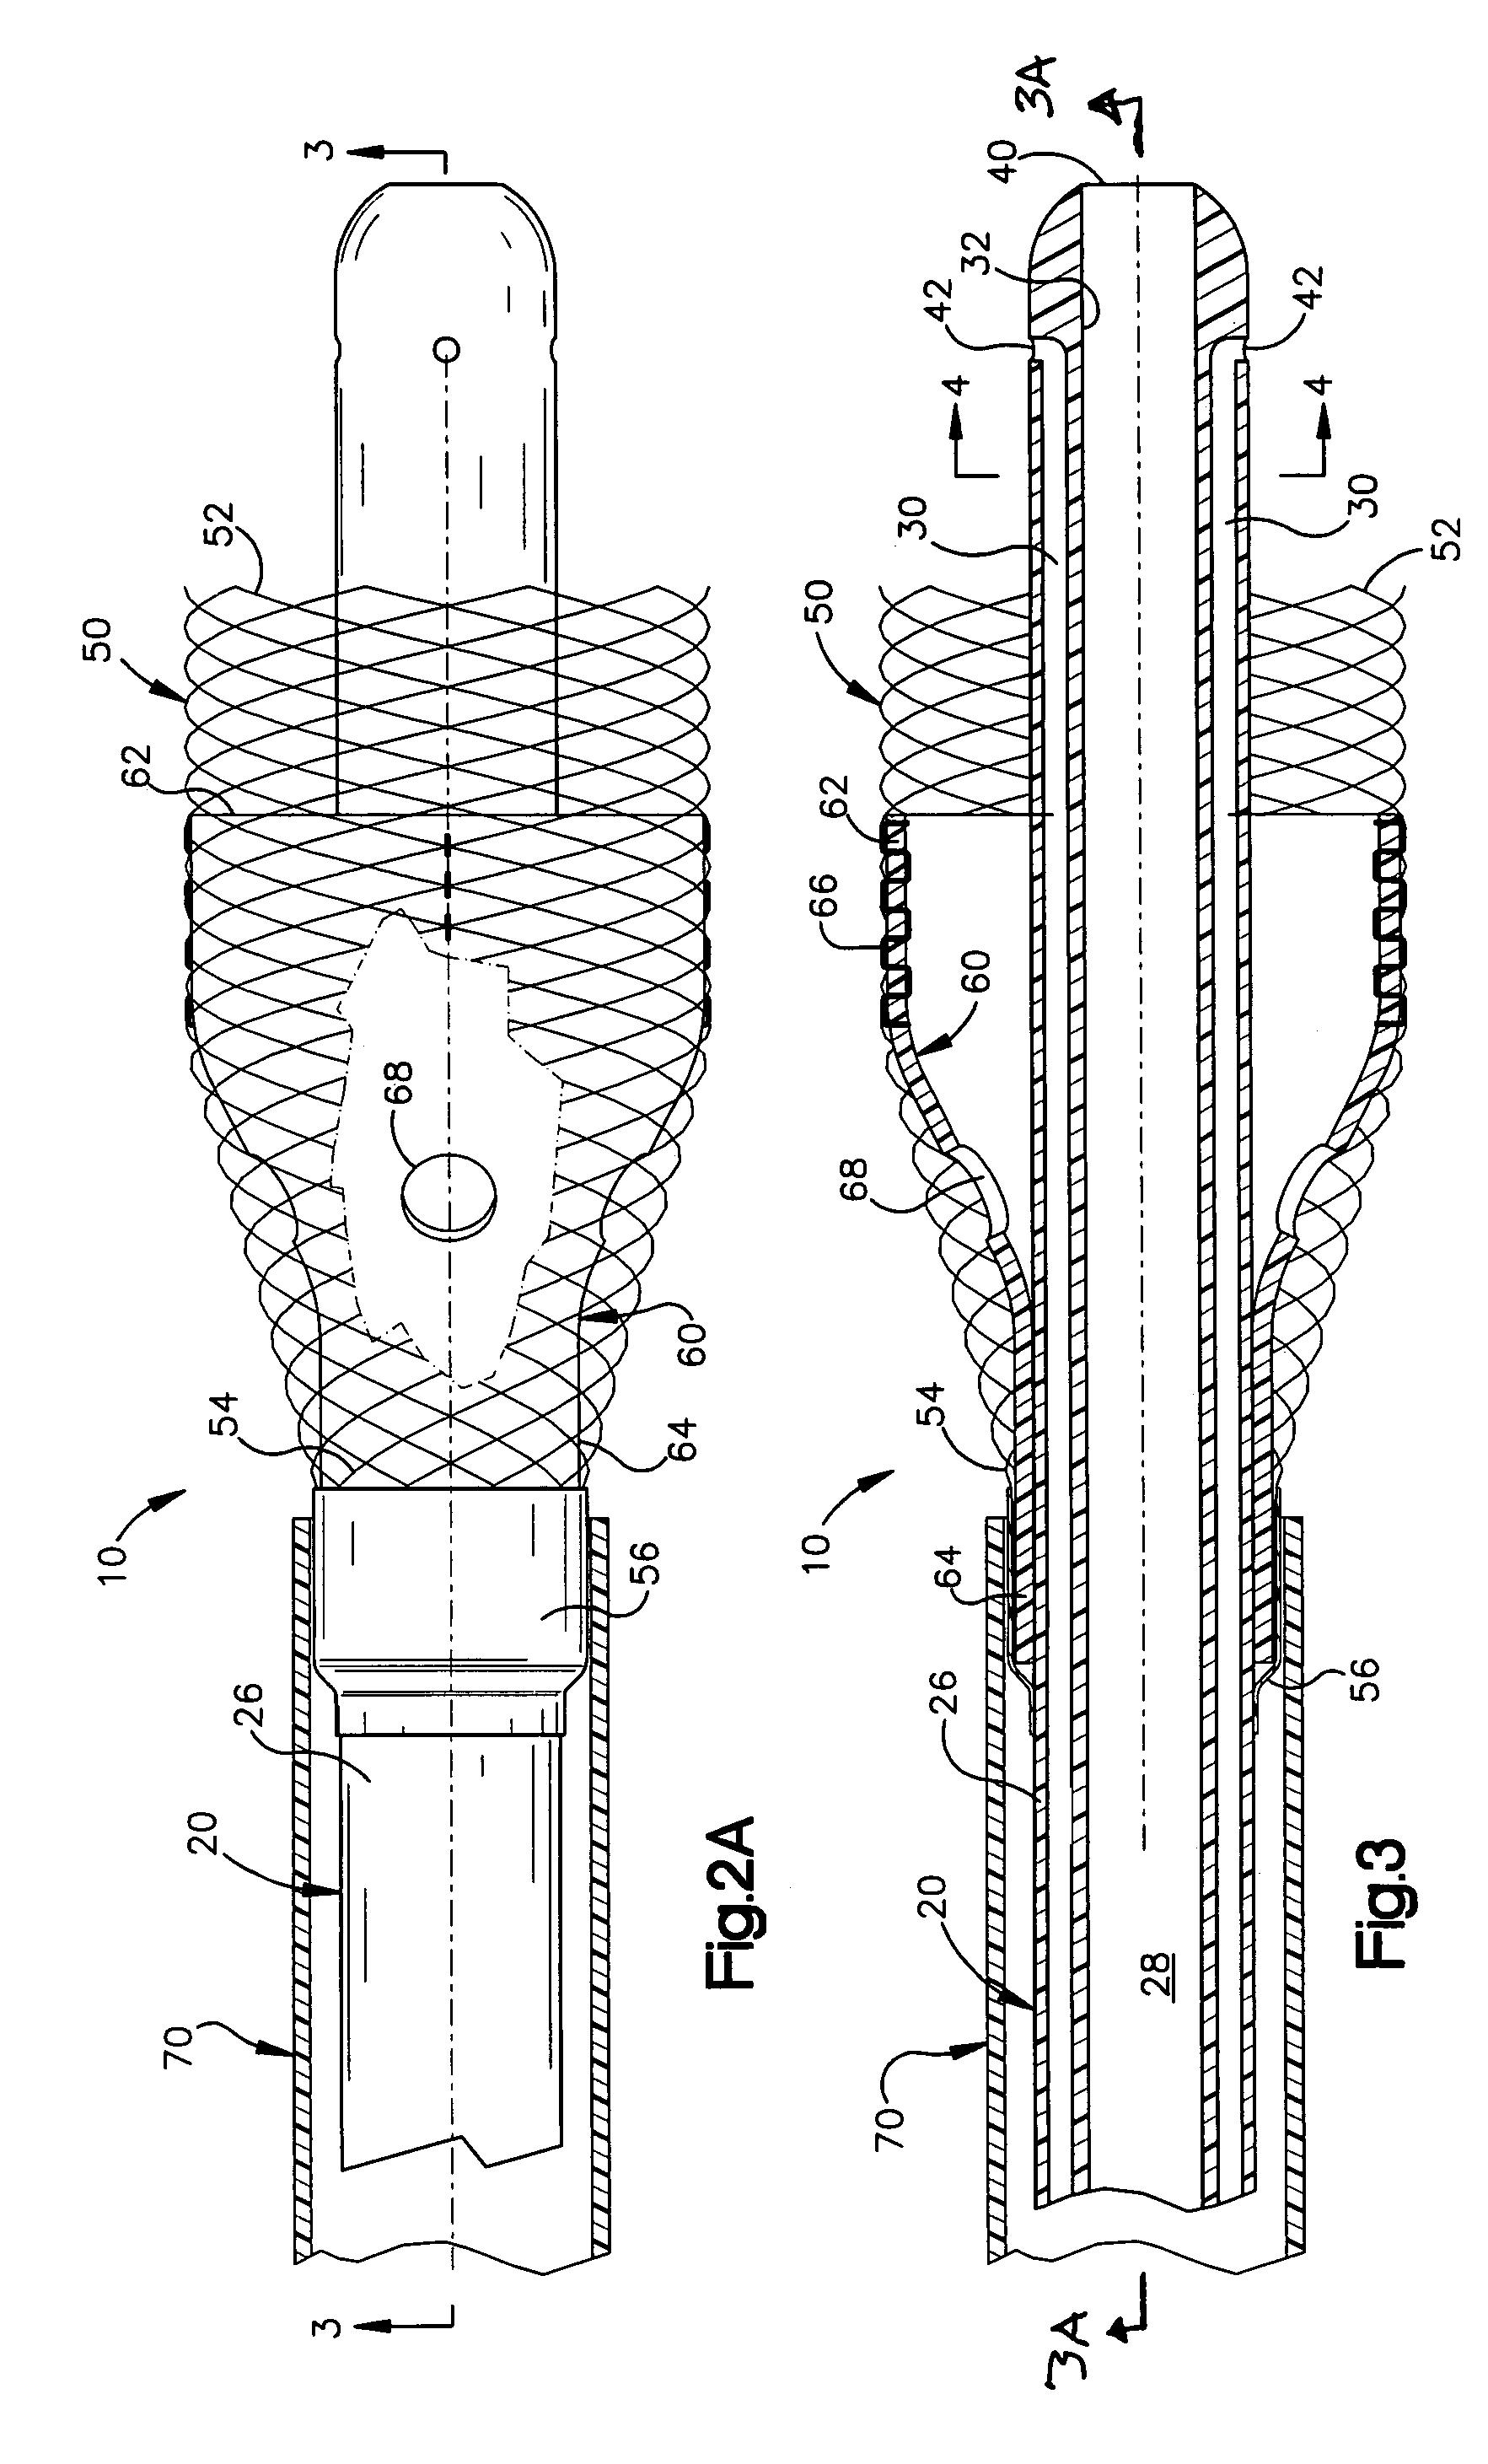 Apparatus and method for auto-retroperfusion of a coronary vein